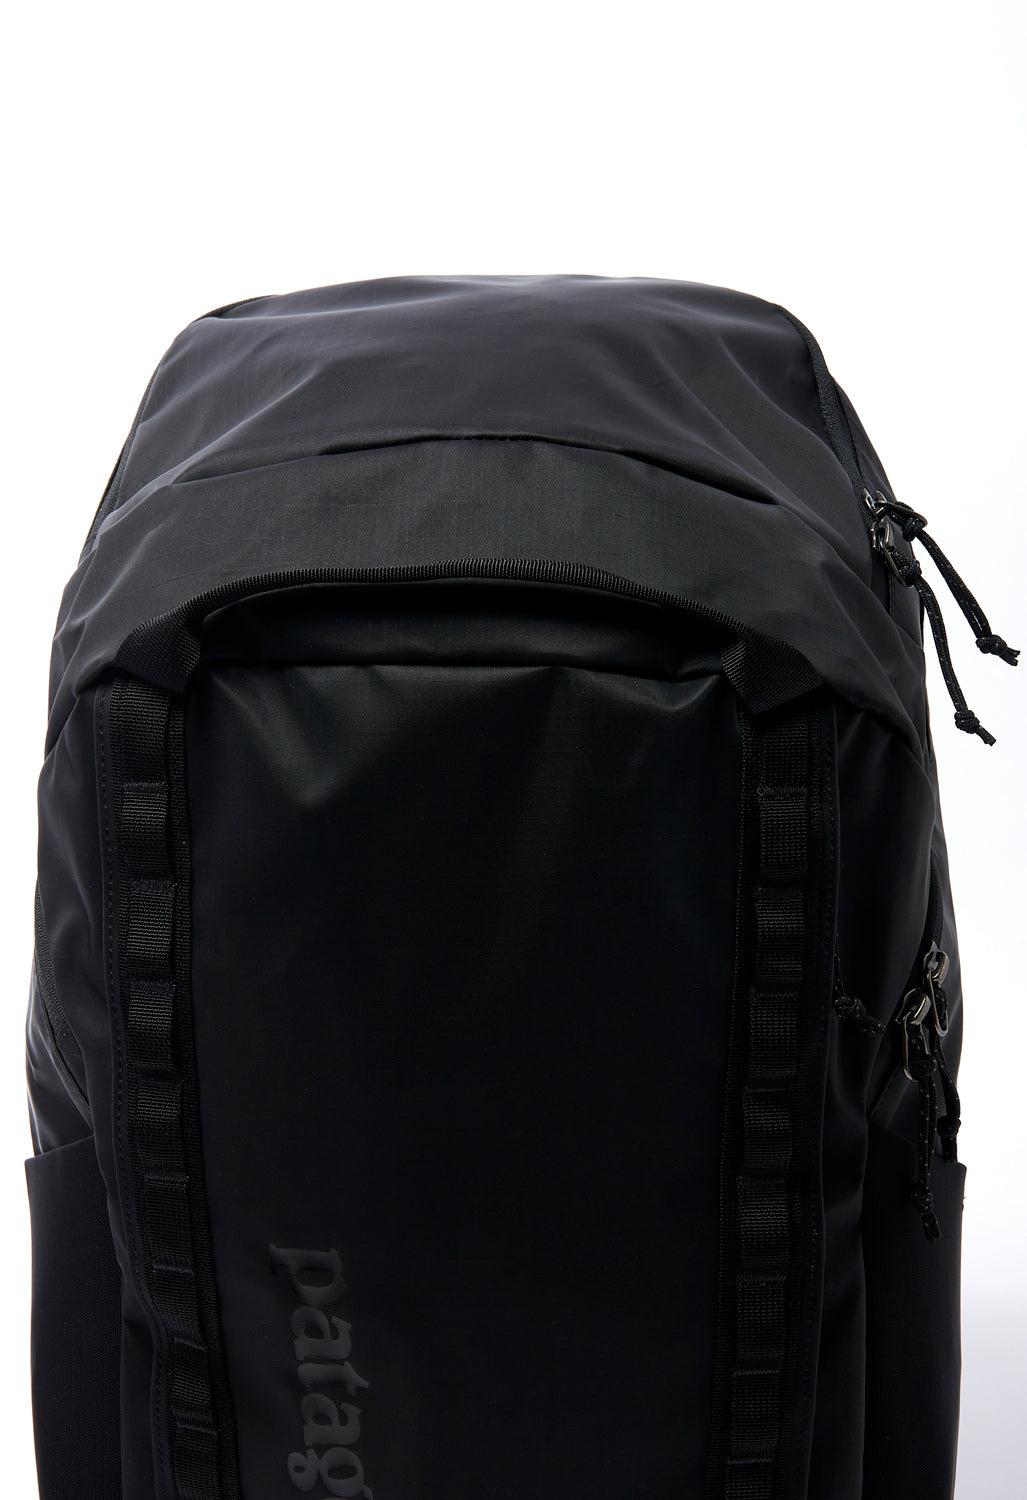 Patagonia Black Hole Pack 32L – Outsiders Store UK